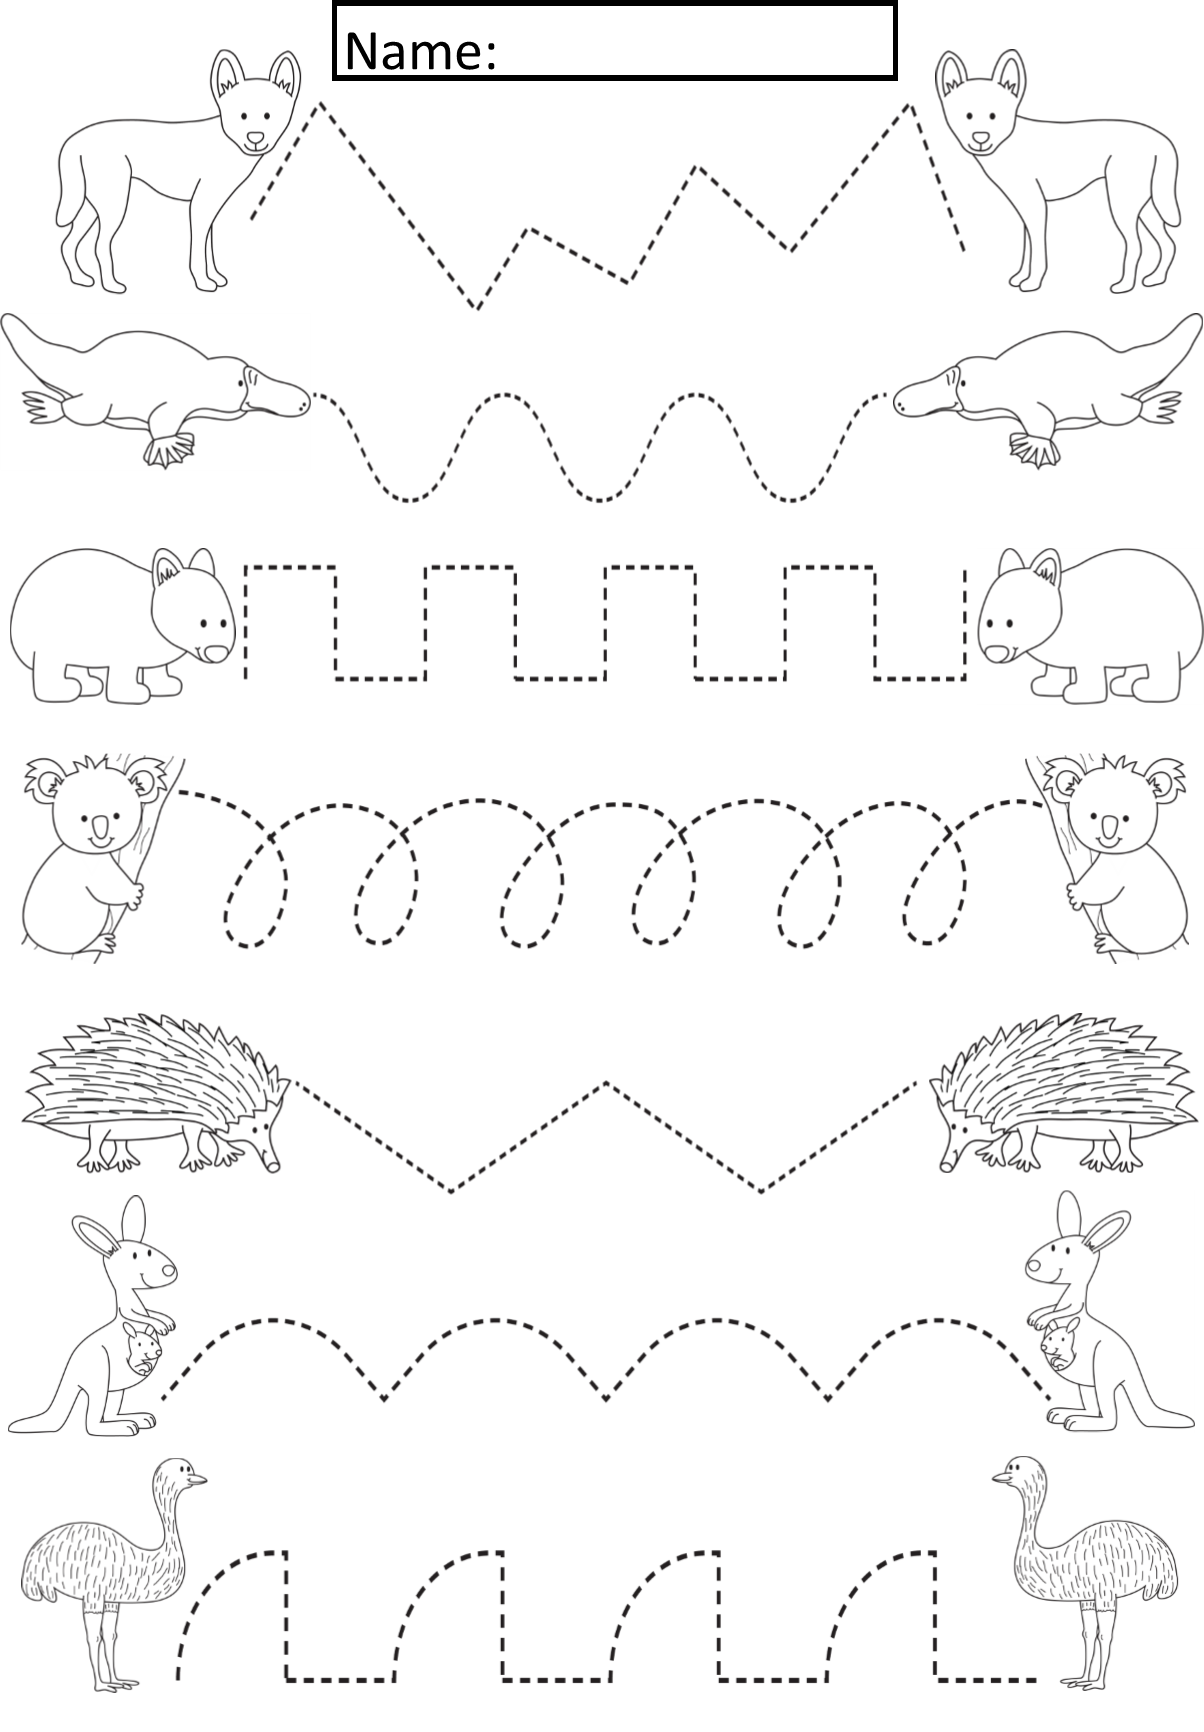 Australian Animals Tracing Lines Activity For Early Years Pre K-1